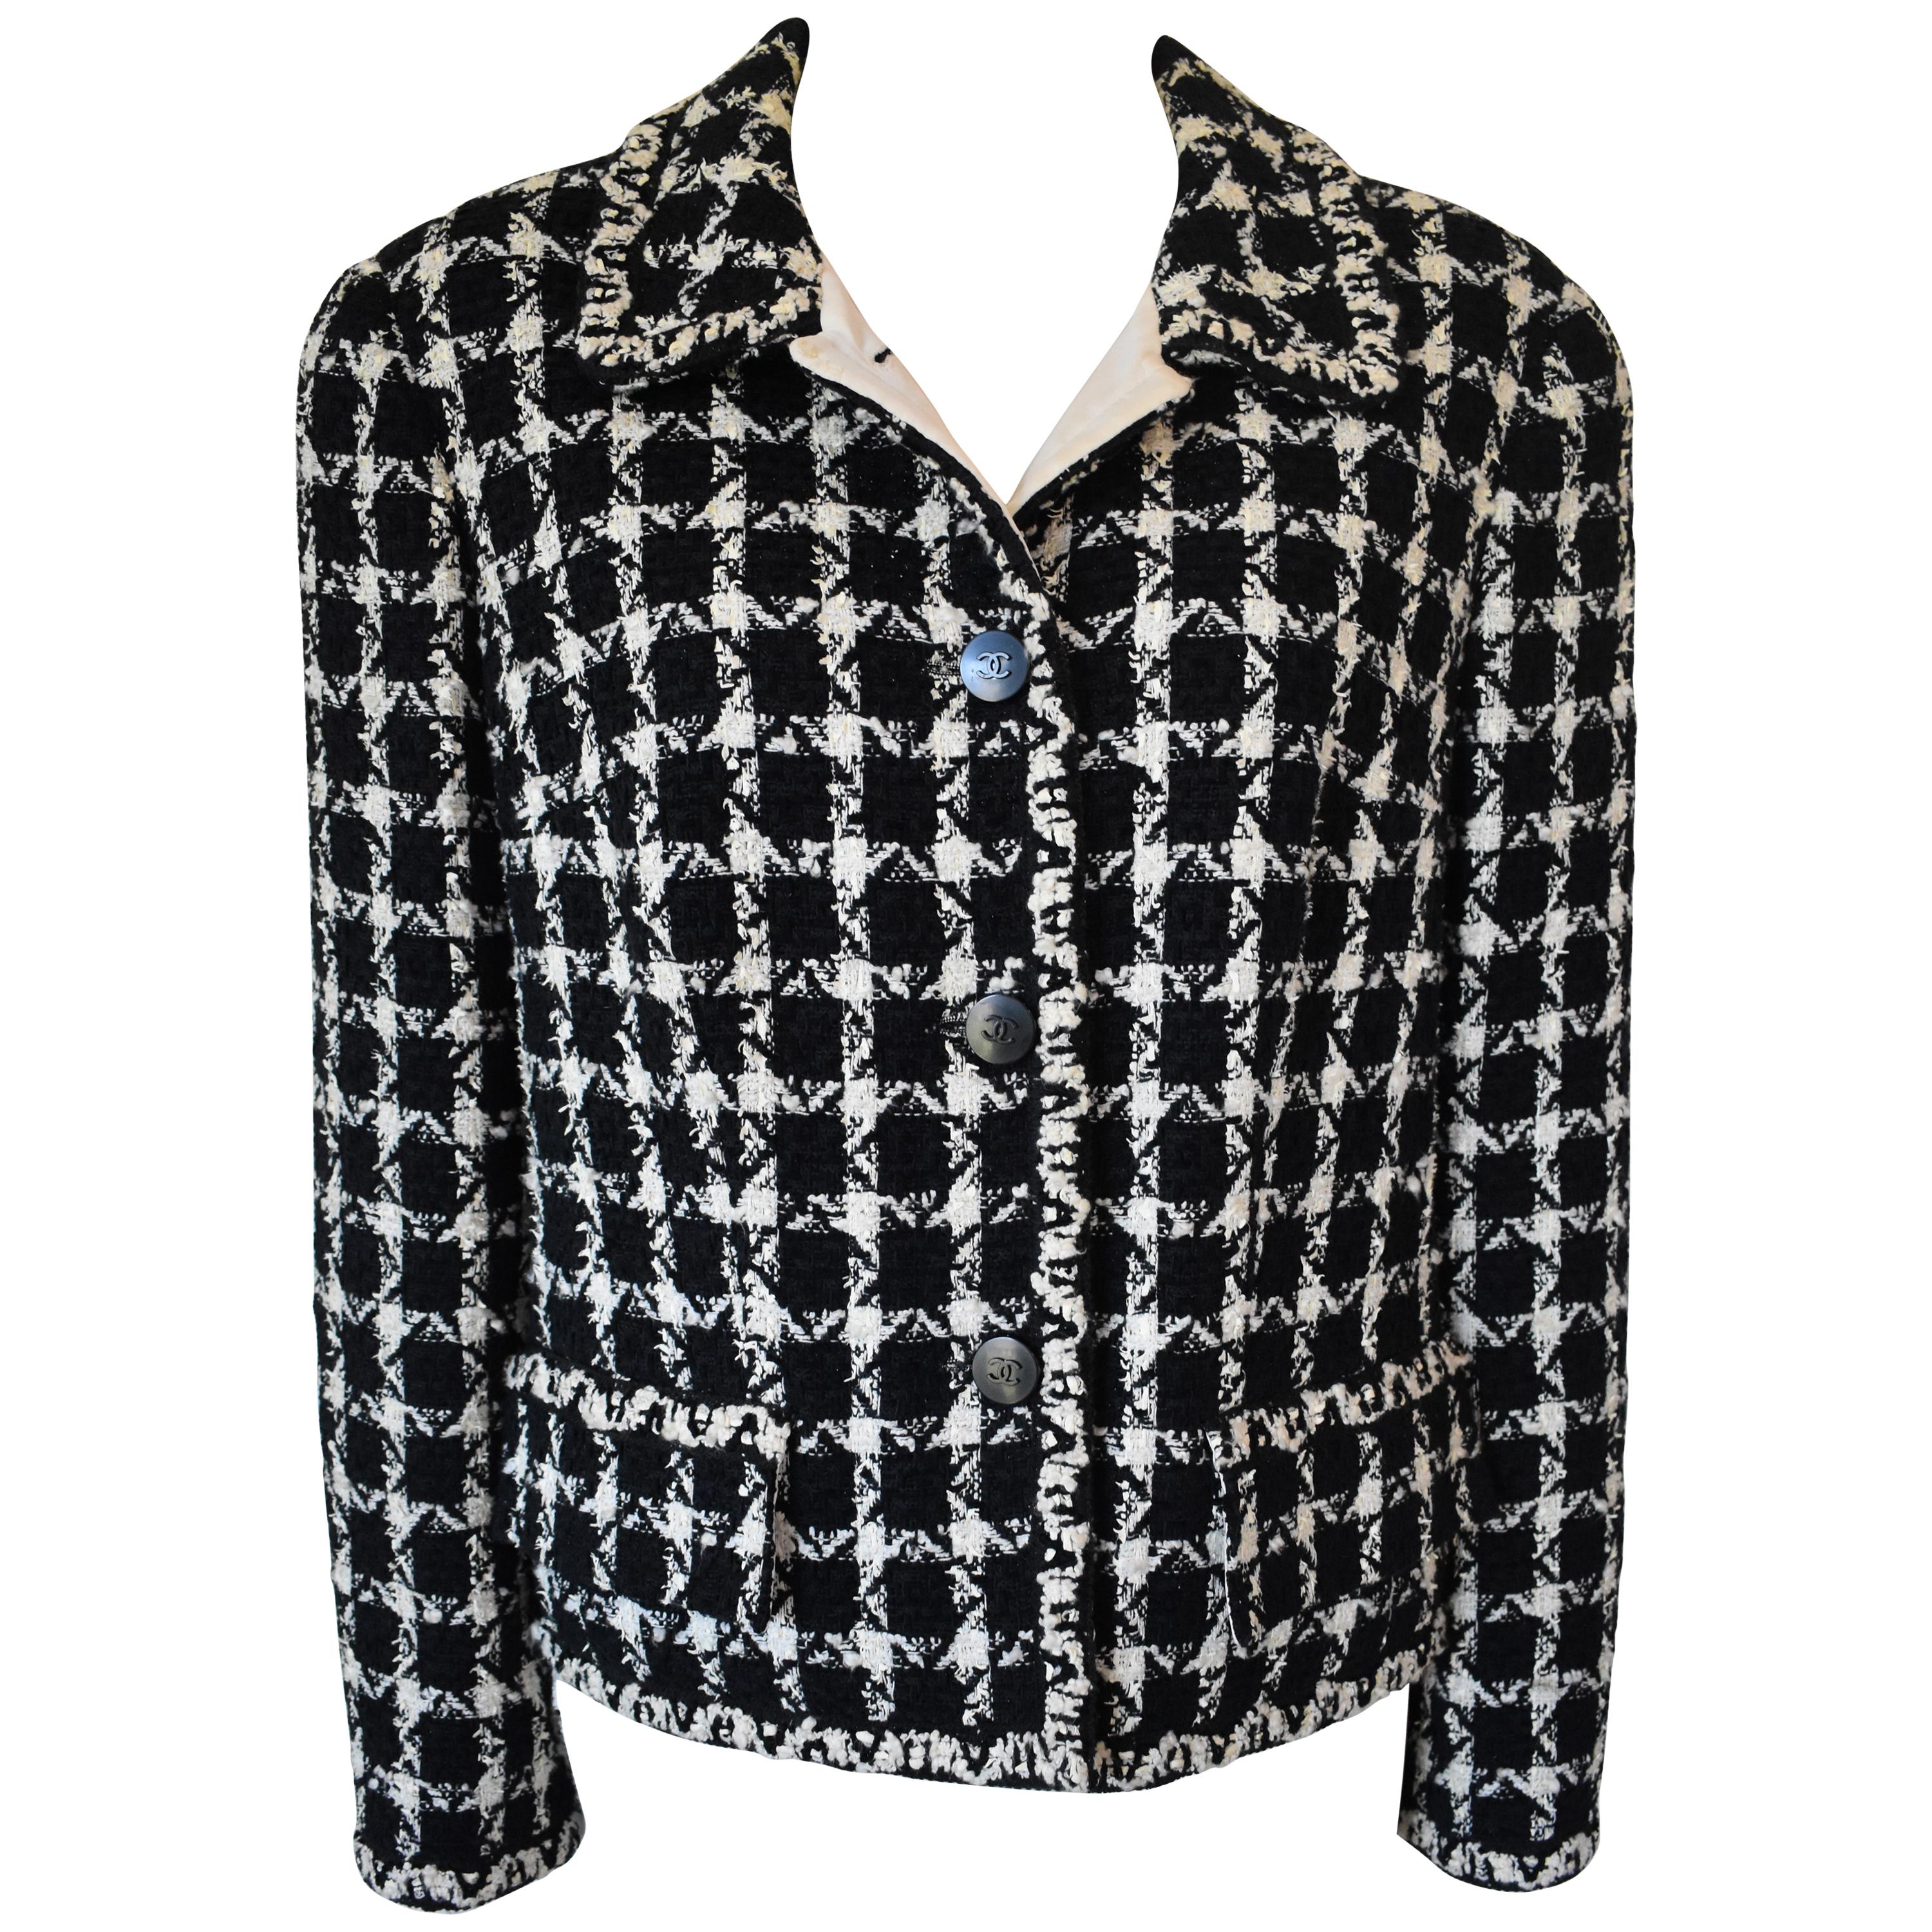 Chanel Classic Houndstooth Boucle Jacket in Black and White, 1998C